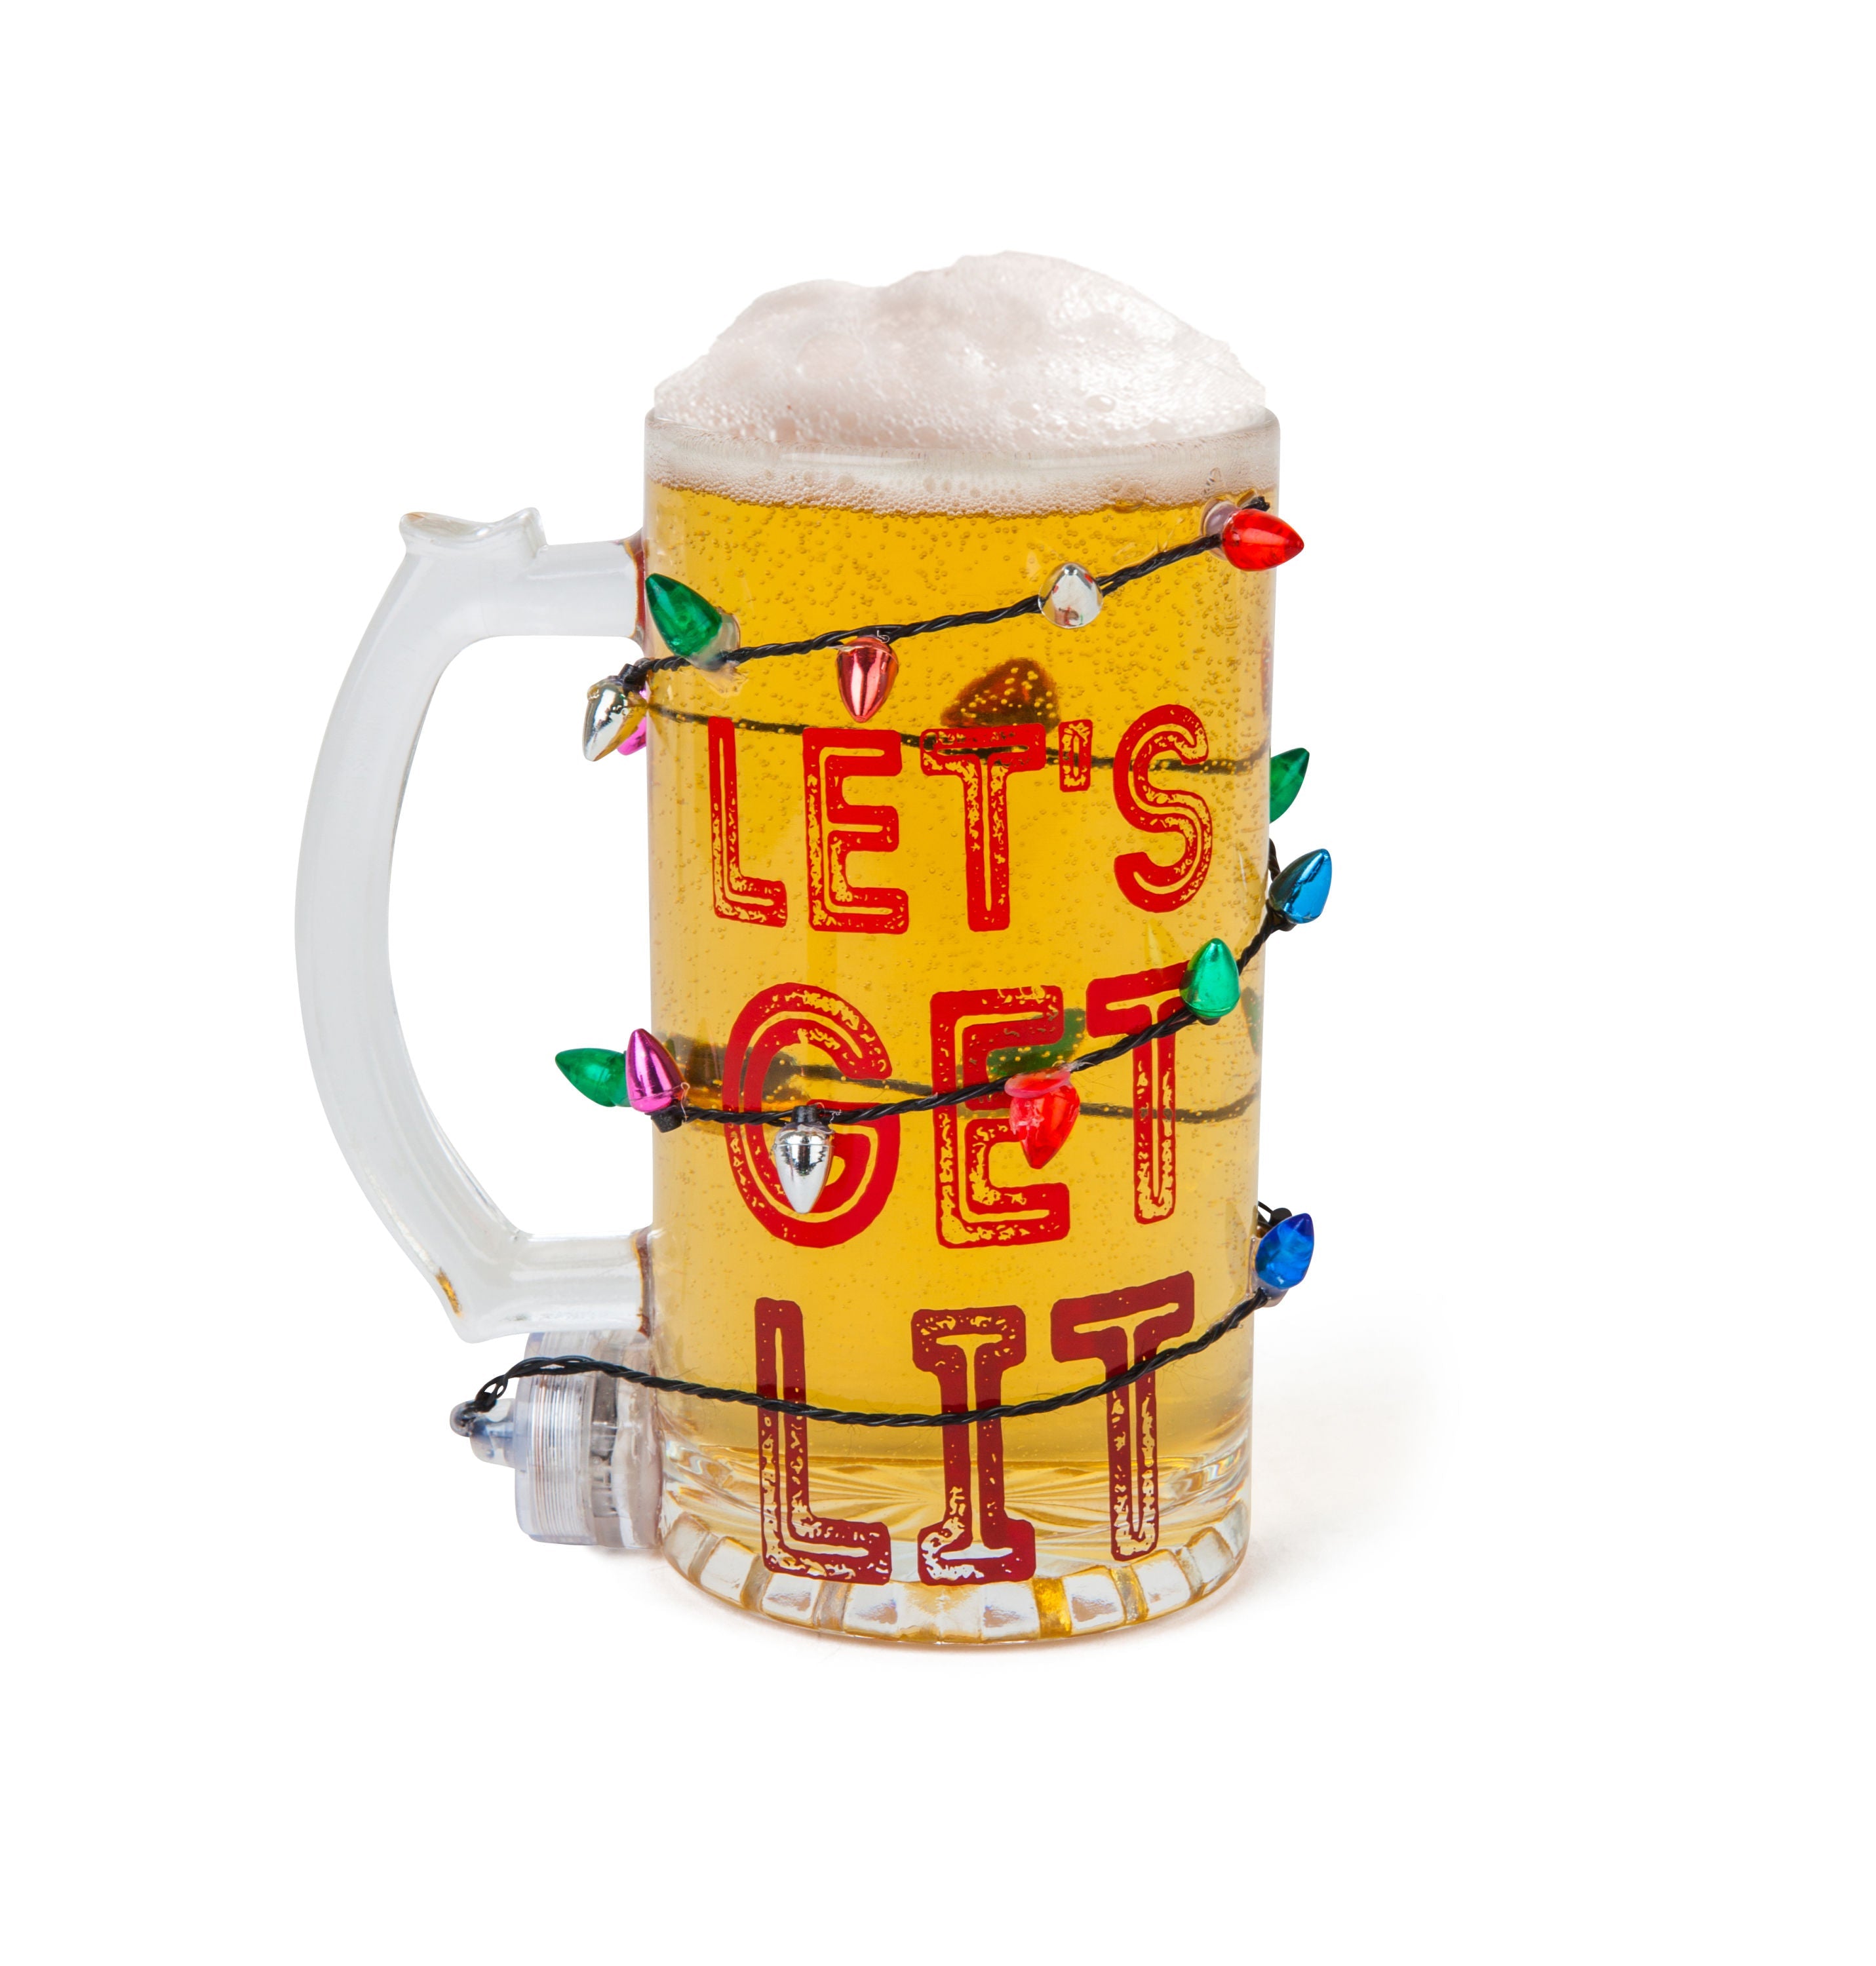 The Get Lit LED Holiday Beer Glass